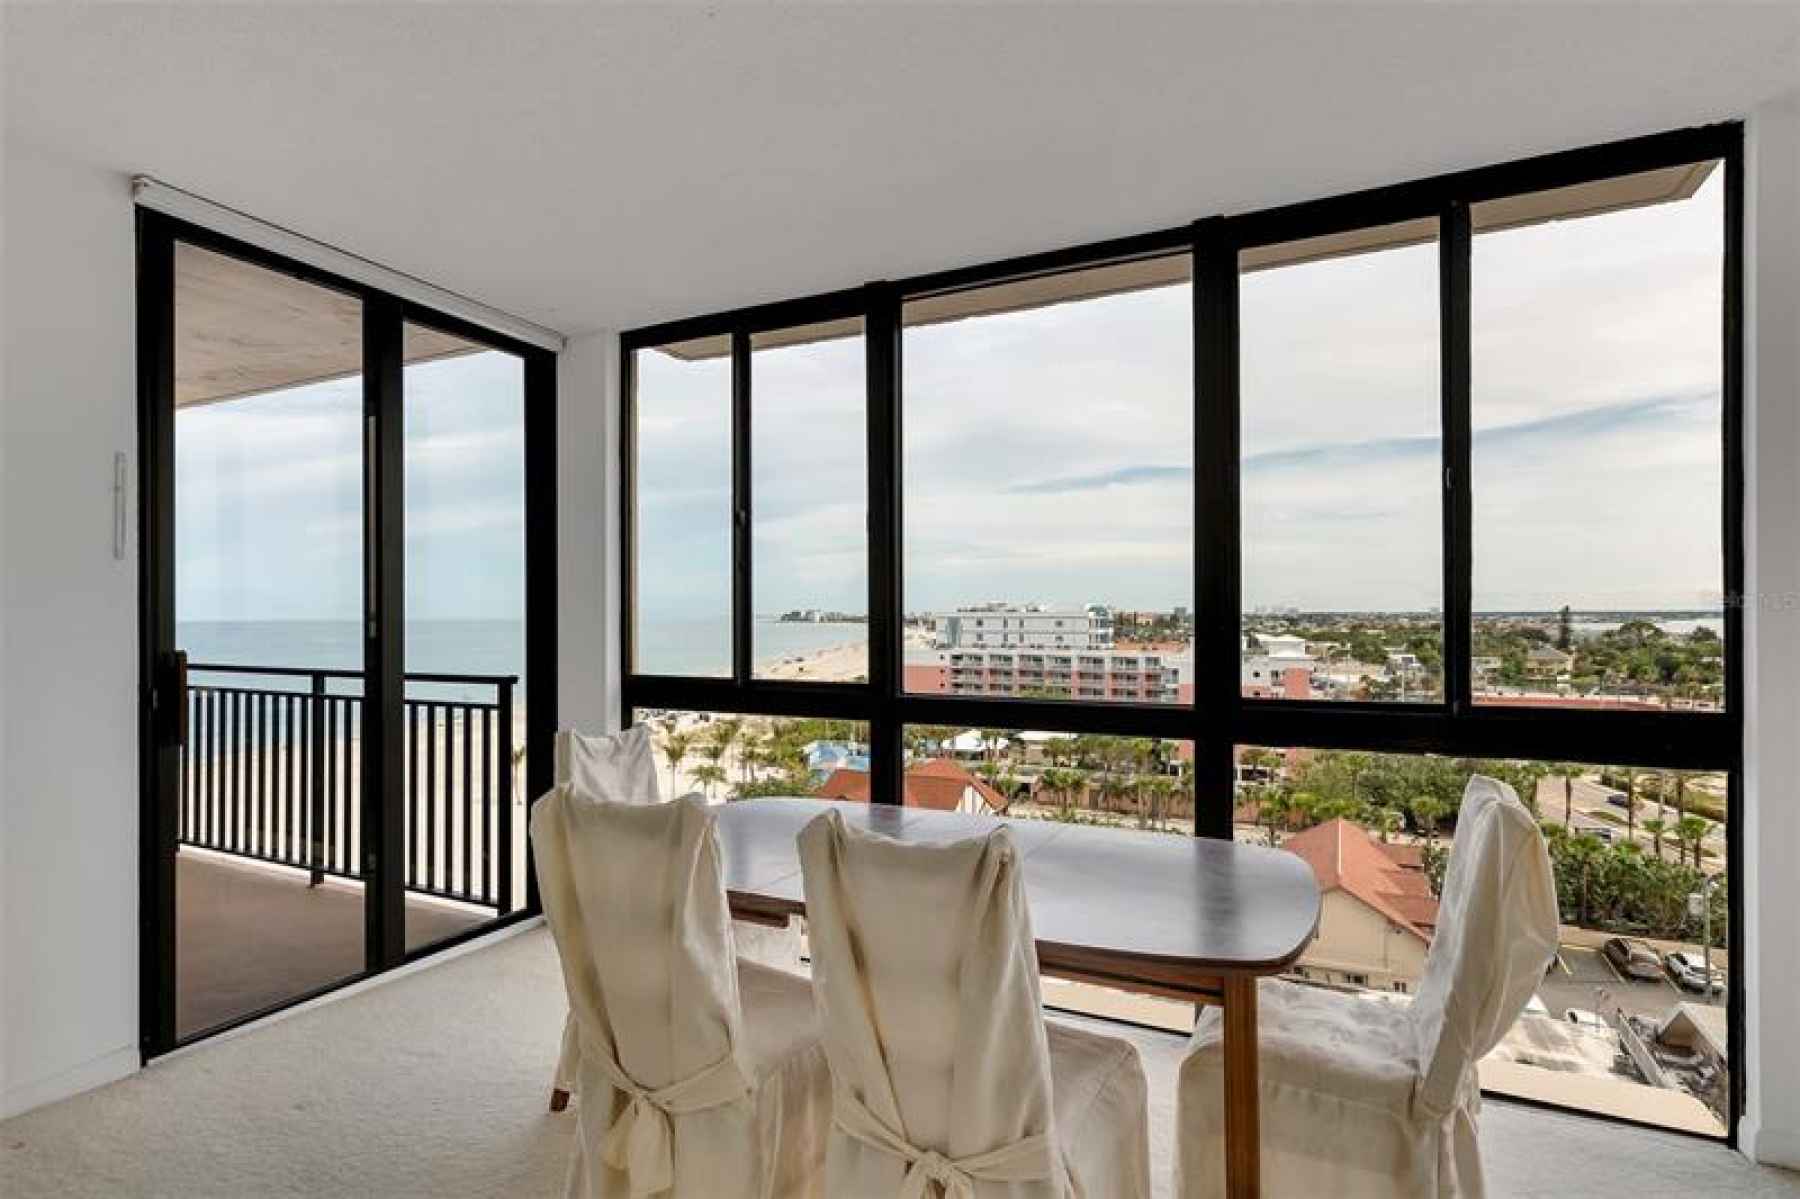 Views from the living room / dining area span west to east to show the beach, Gulf Blvd. and Boca Ci